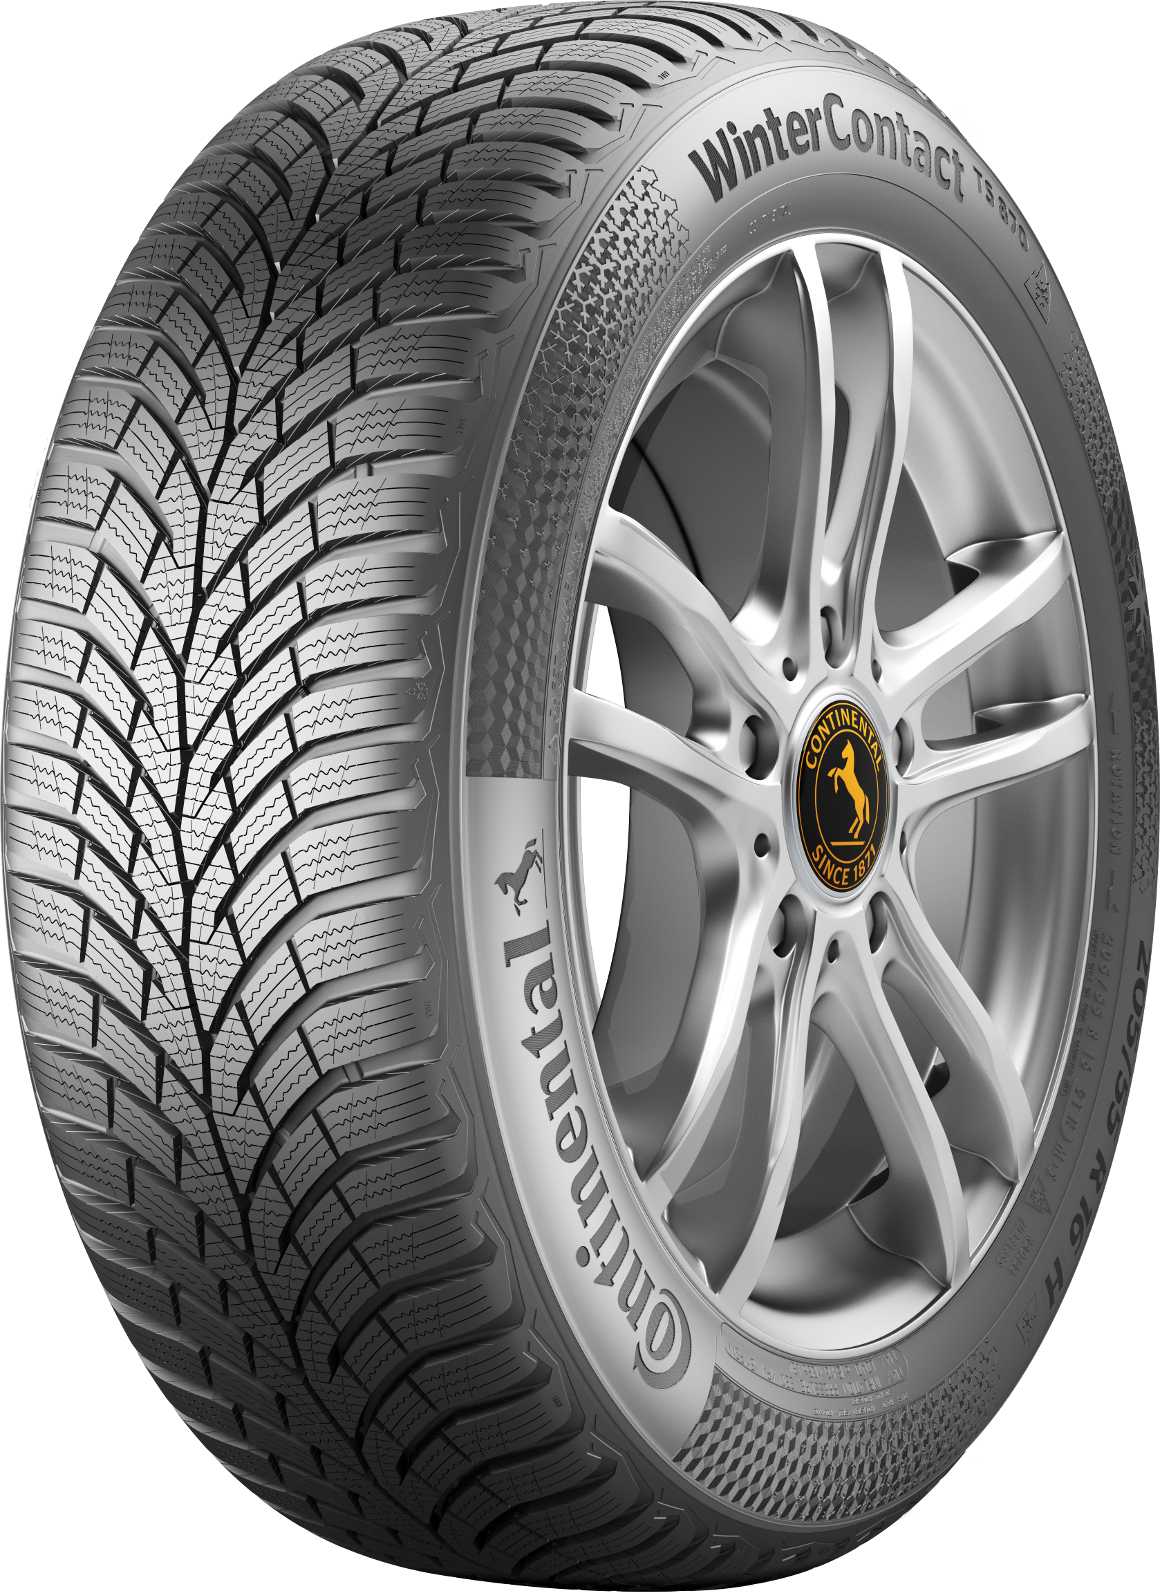    Continental Winter Contact TS870 165/70 R14 